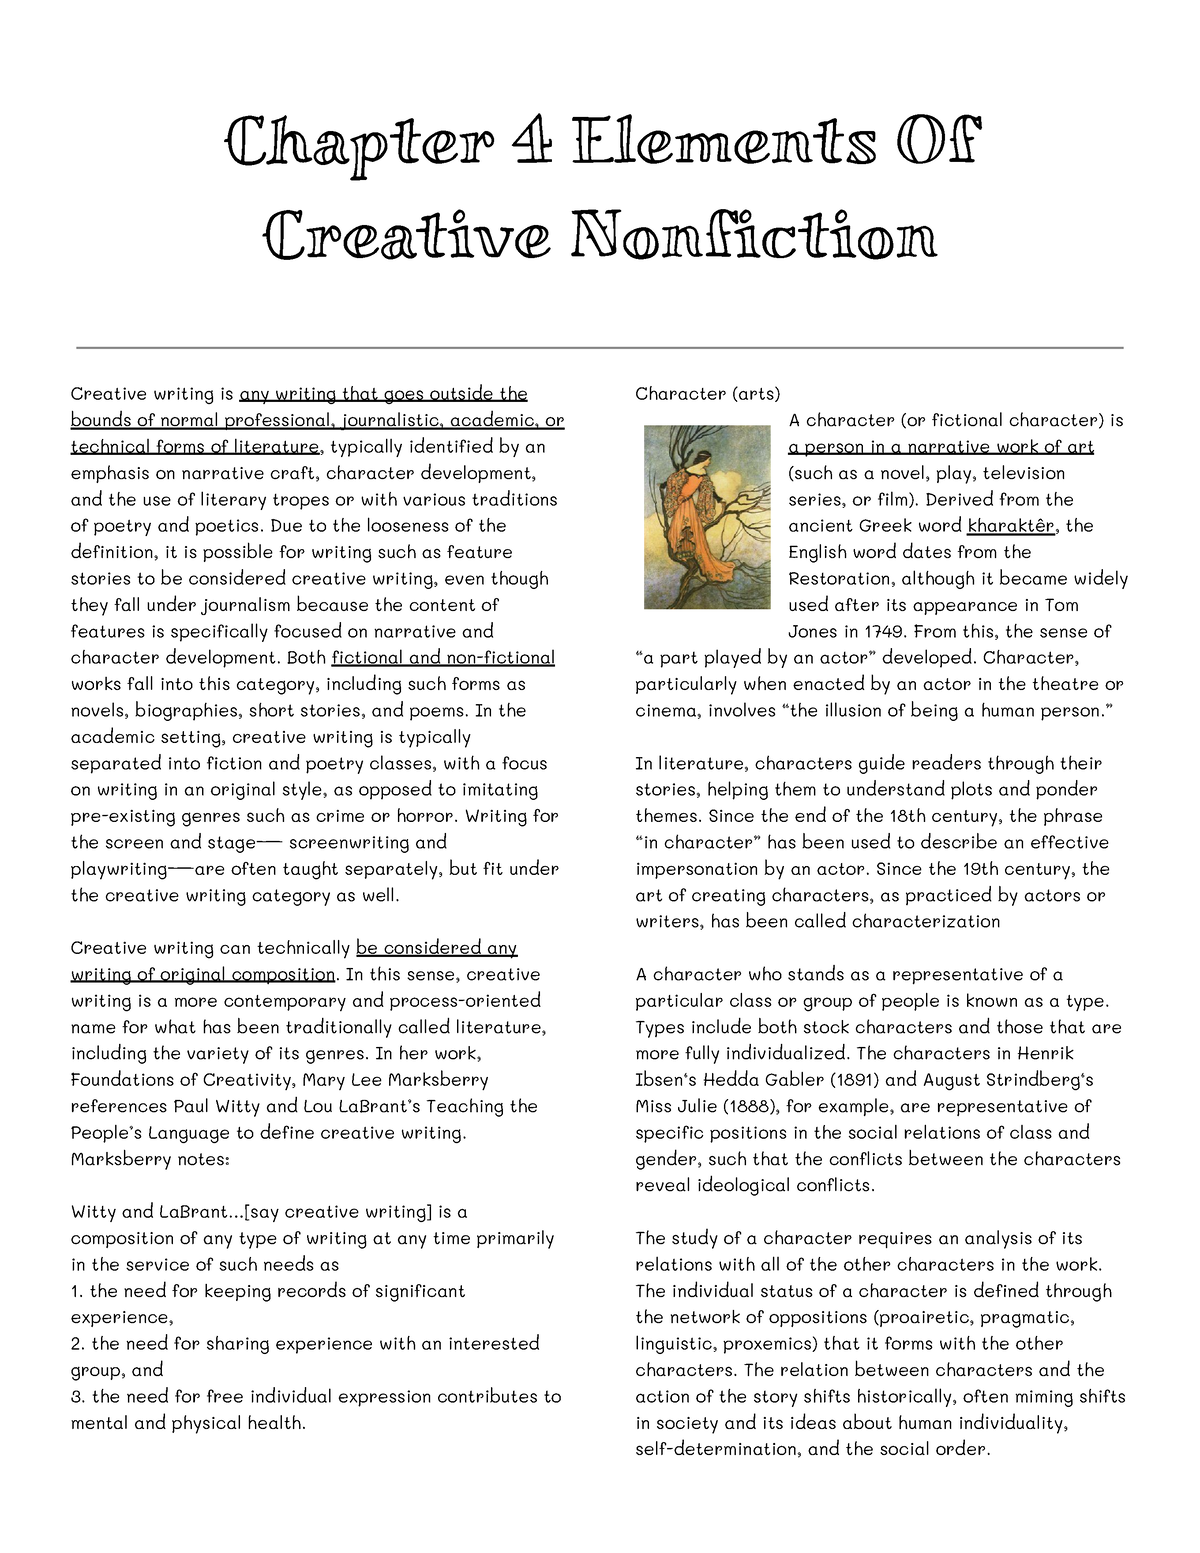 what should be done when writing a creative nonfiction essay draft